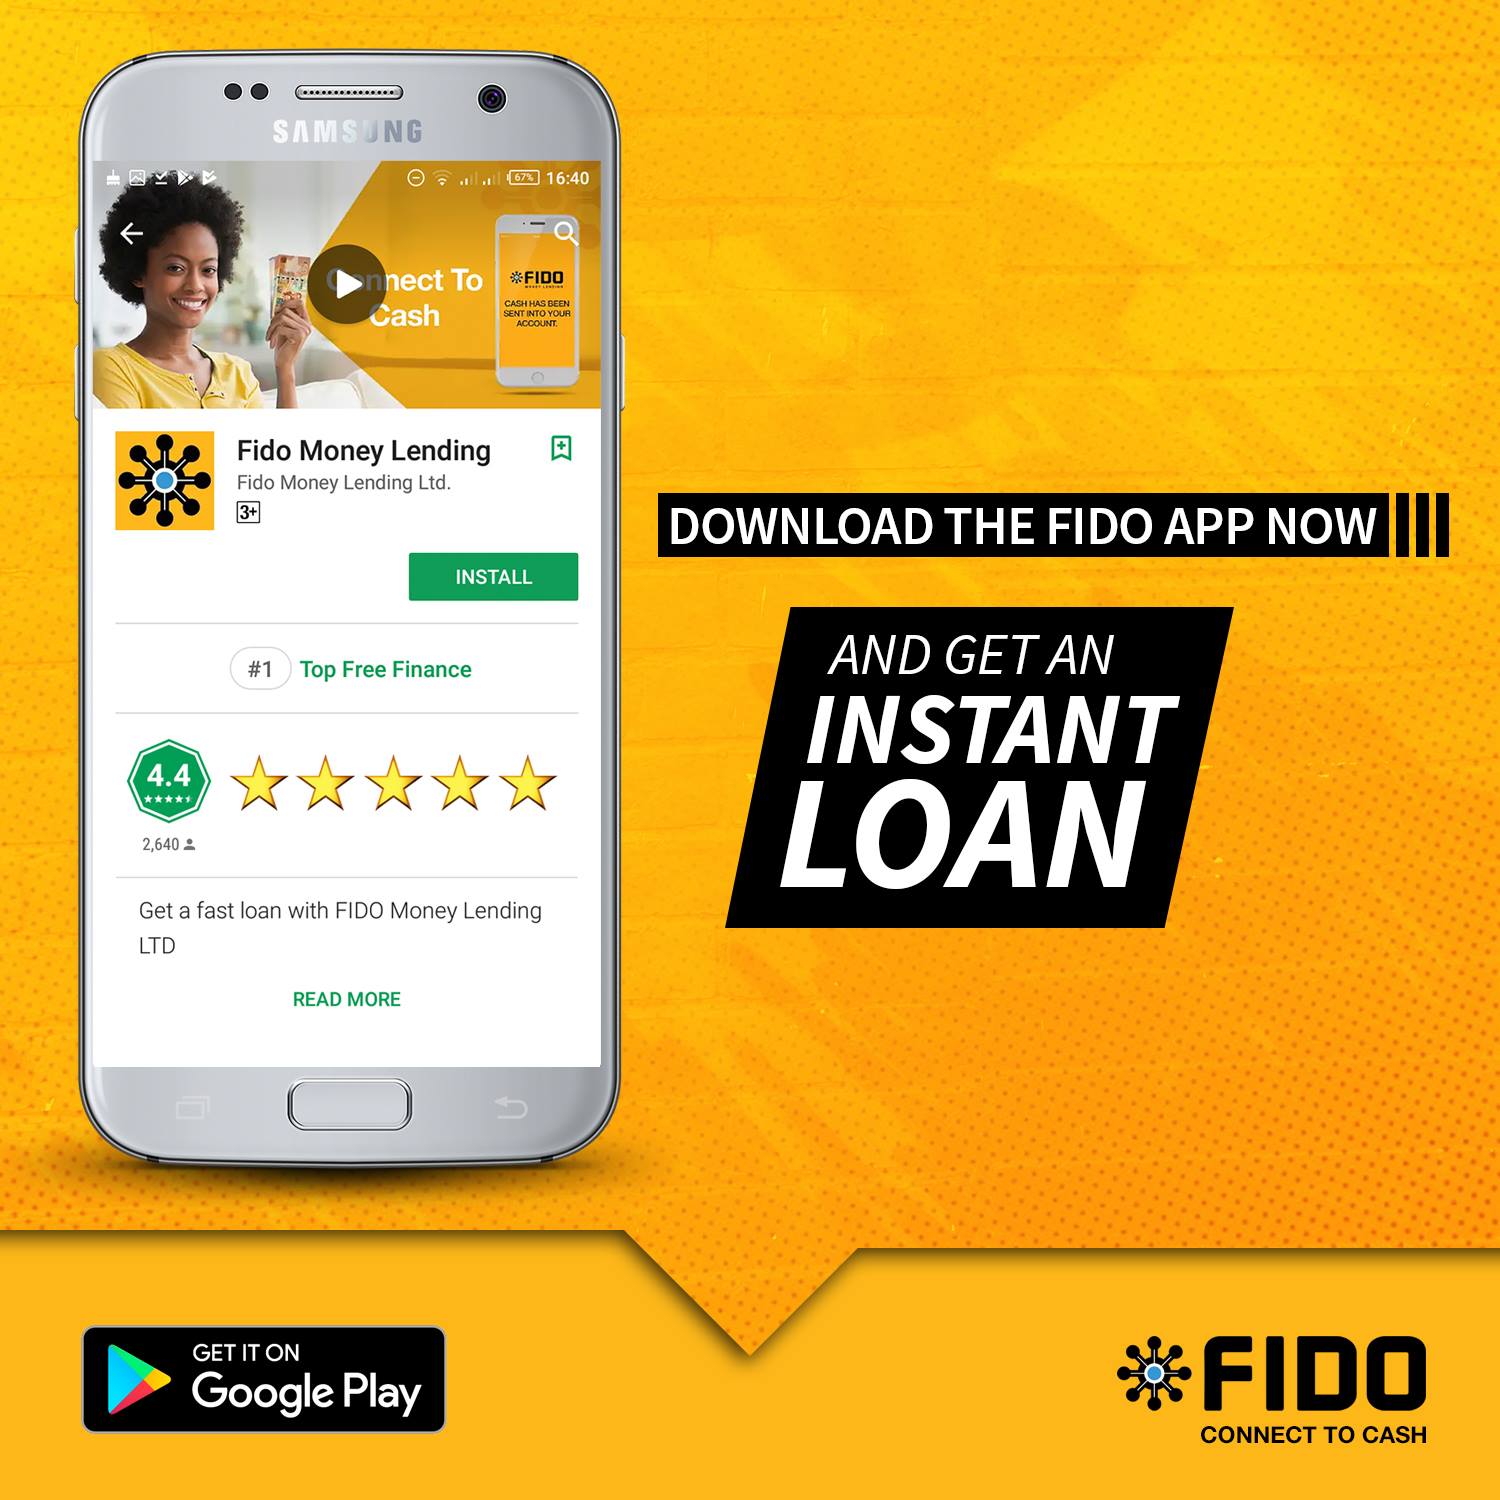 How to get up to GHS1000 Loan from Fido Money Lending Limited